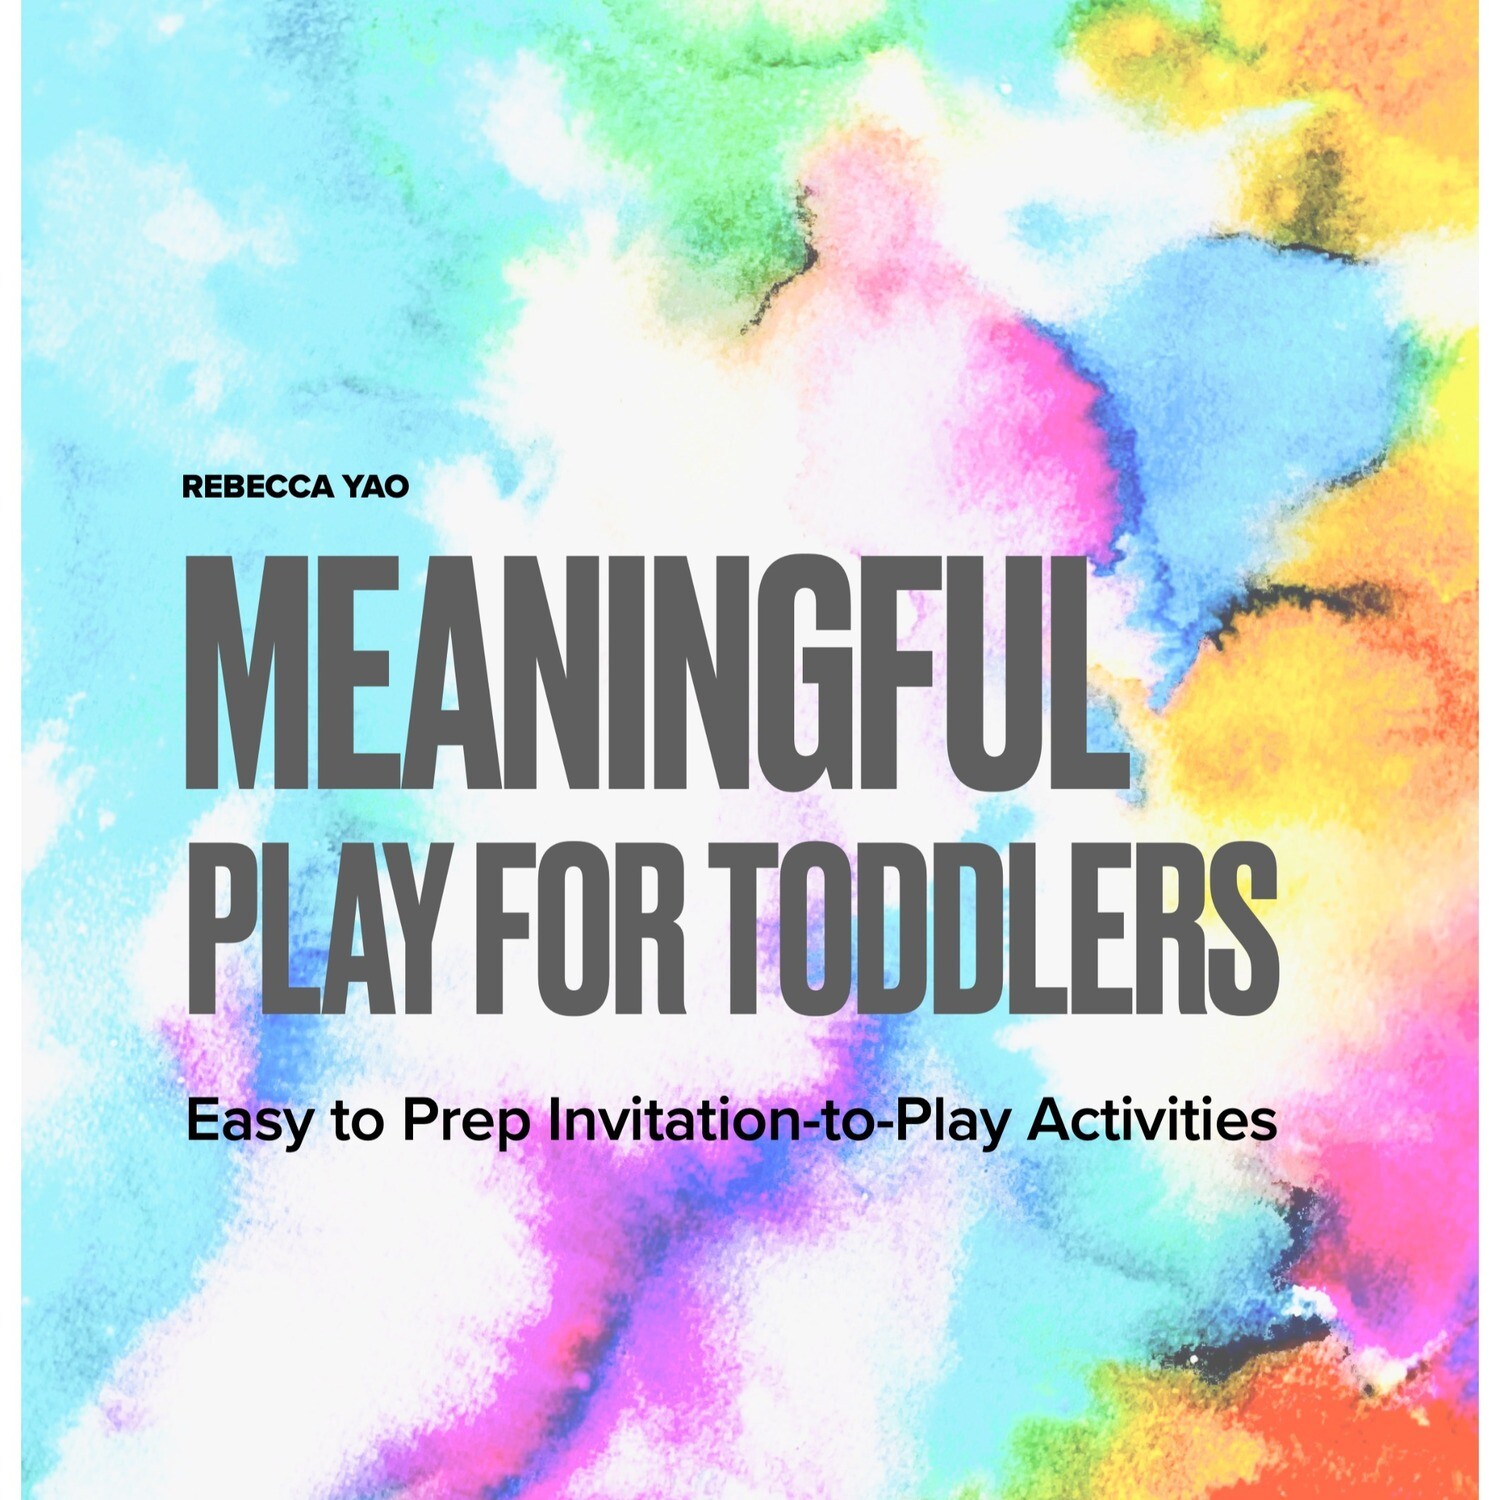 Meaningful Play for Toddlers (e-book)